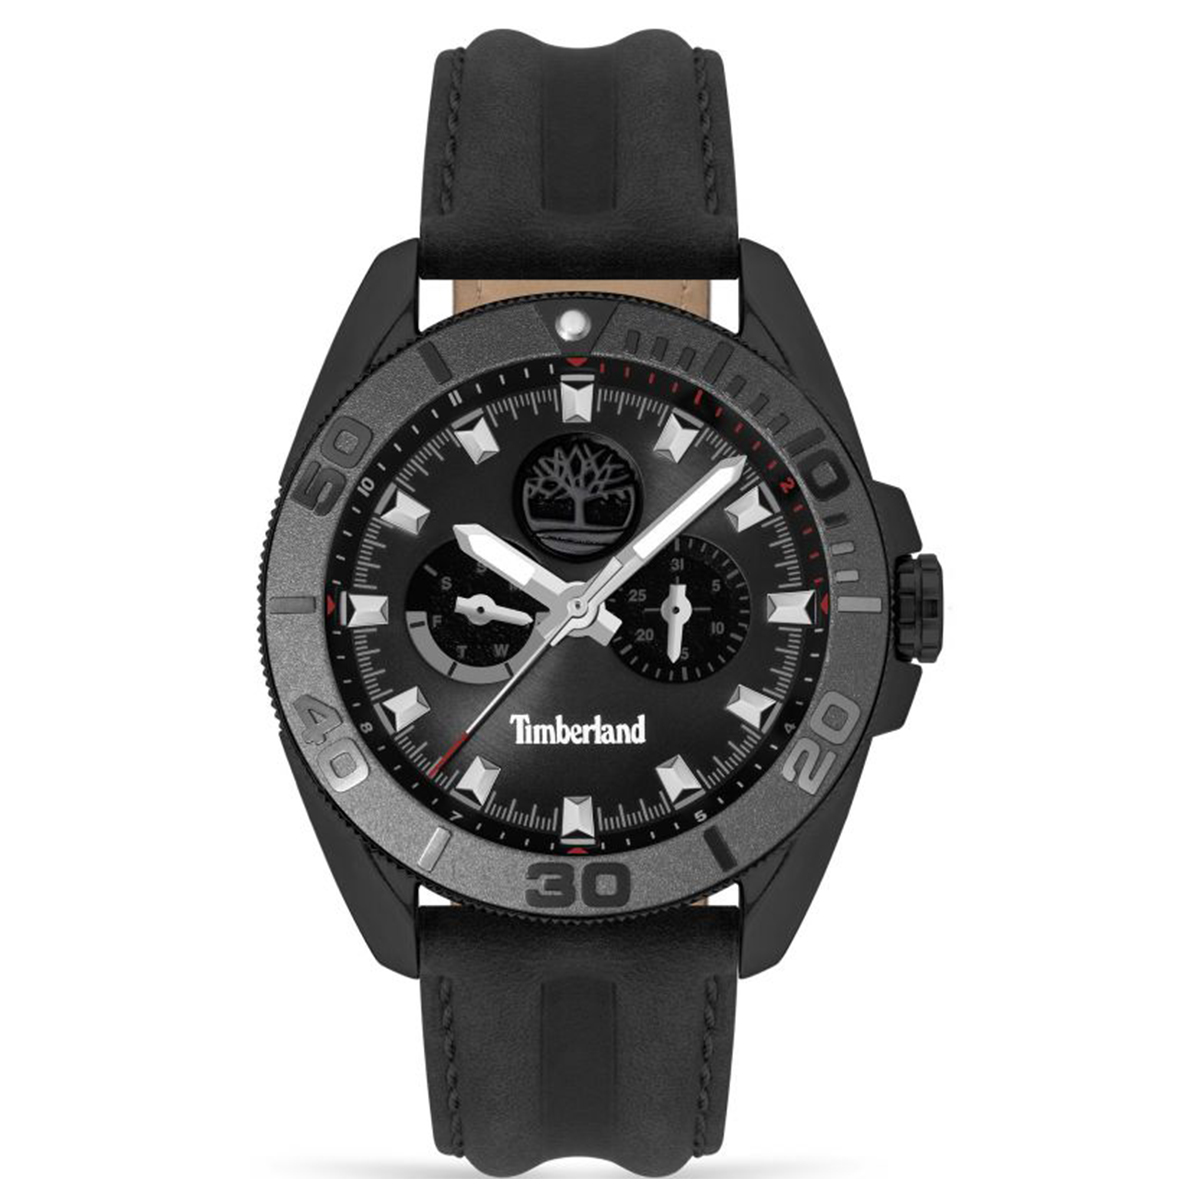 MONTRE TIMBERLAND HOMME SIMPLE CUIR